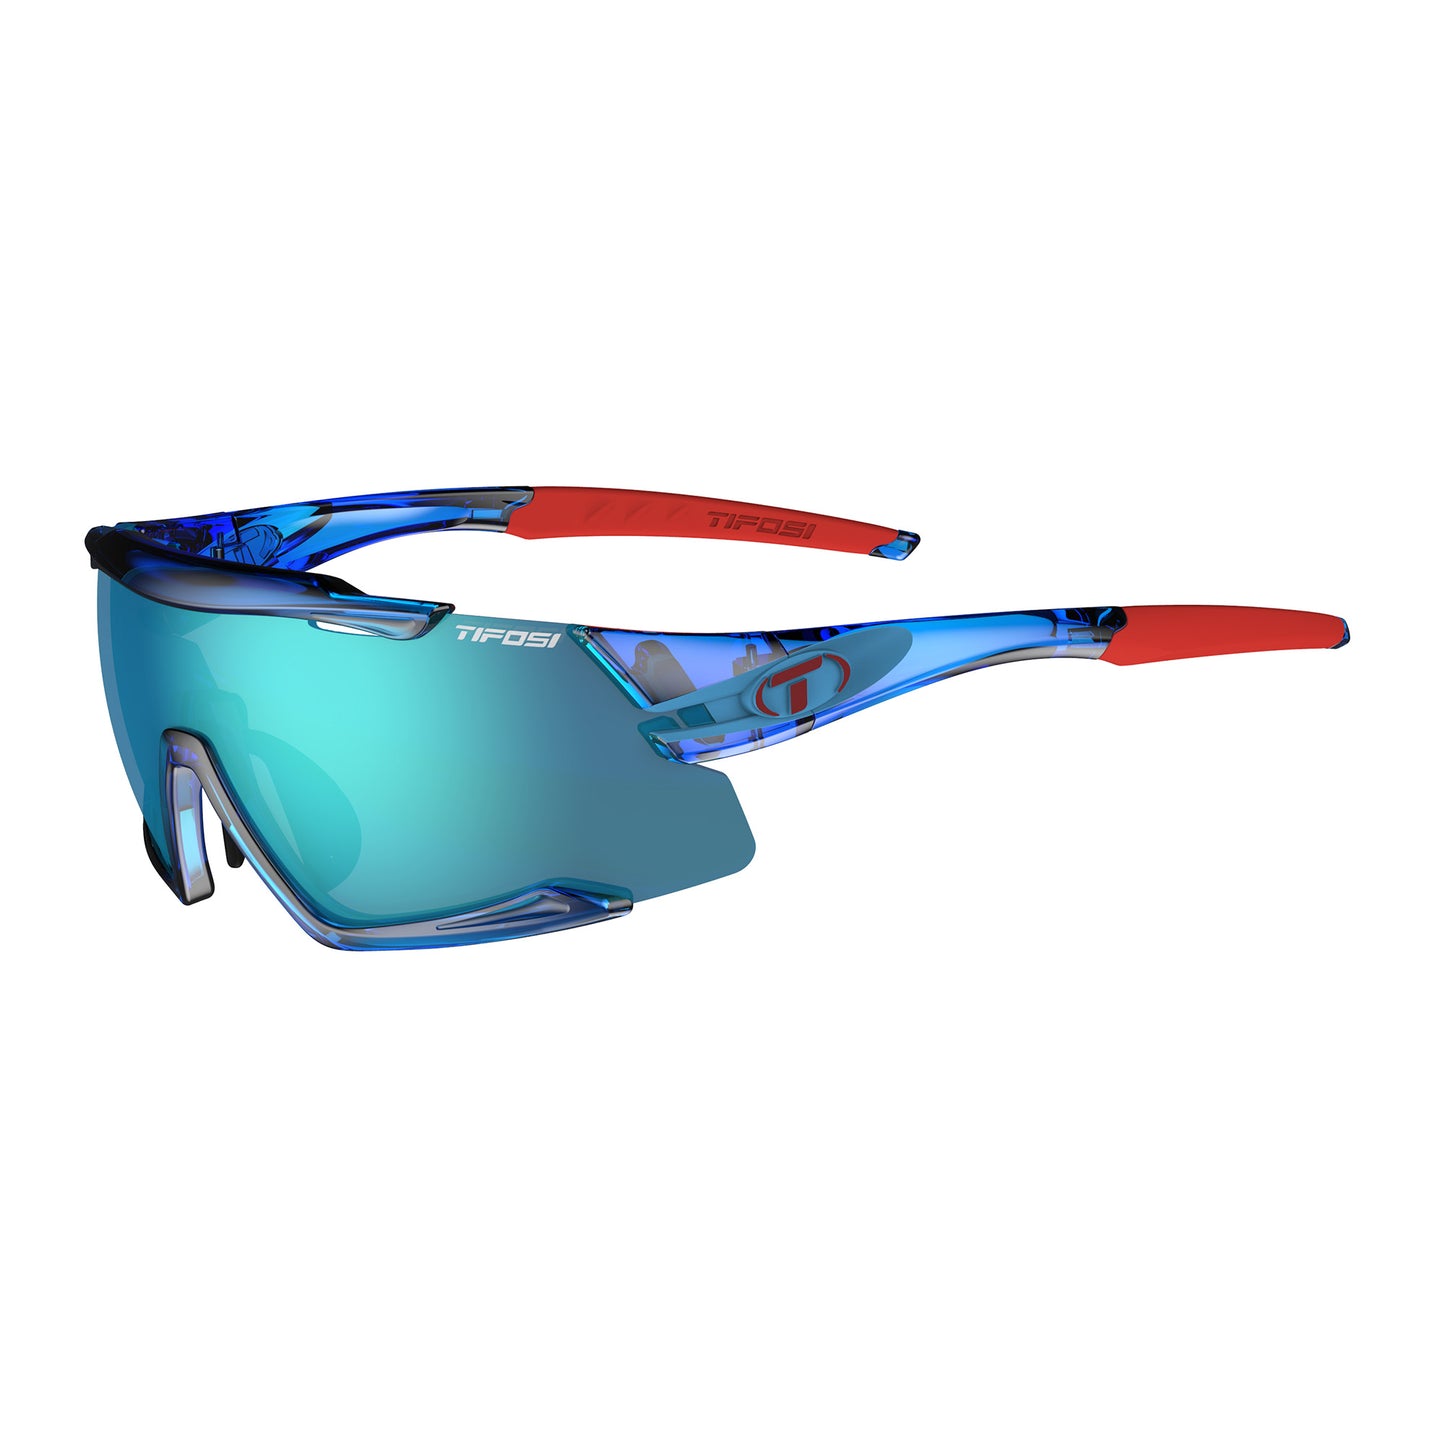 Tifosi Aethon interchangeable Clarion lens sunglasses Crystal blue/ Clarion blue